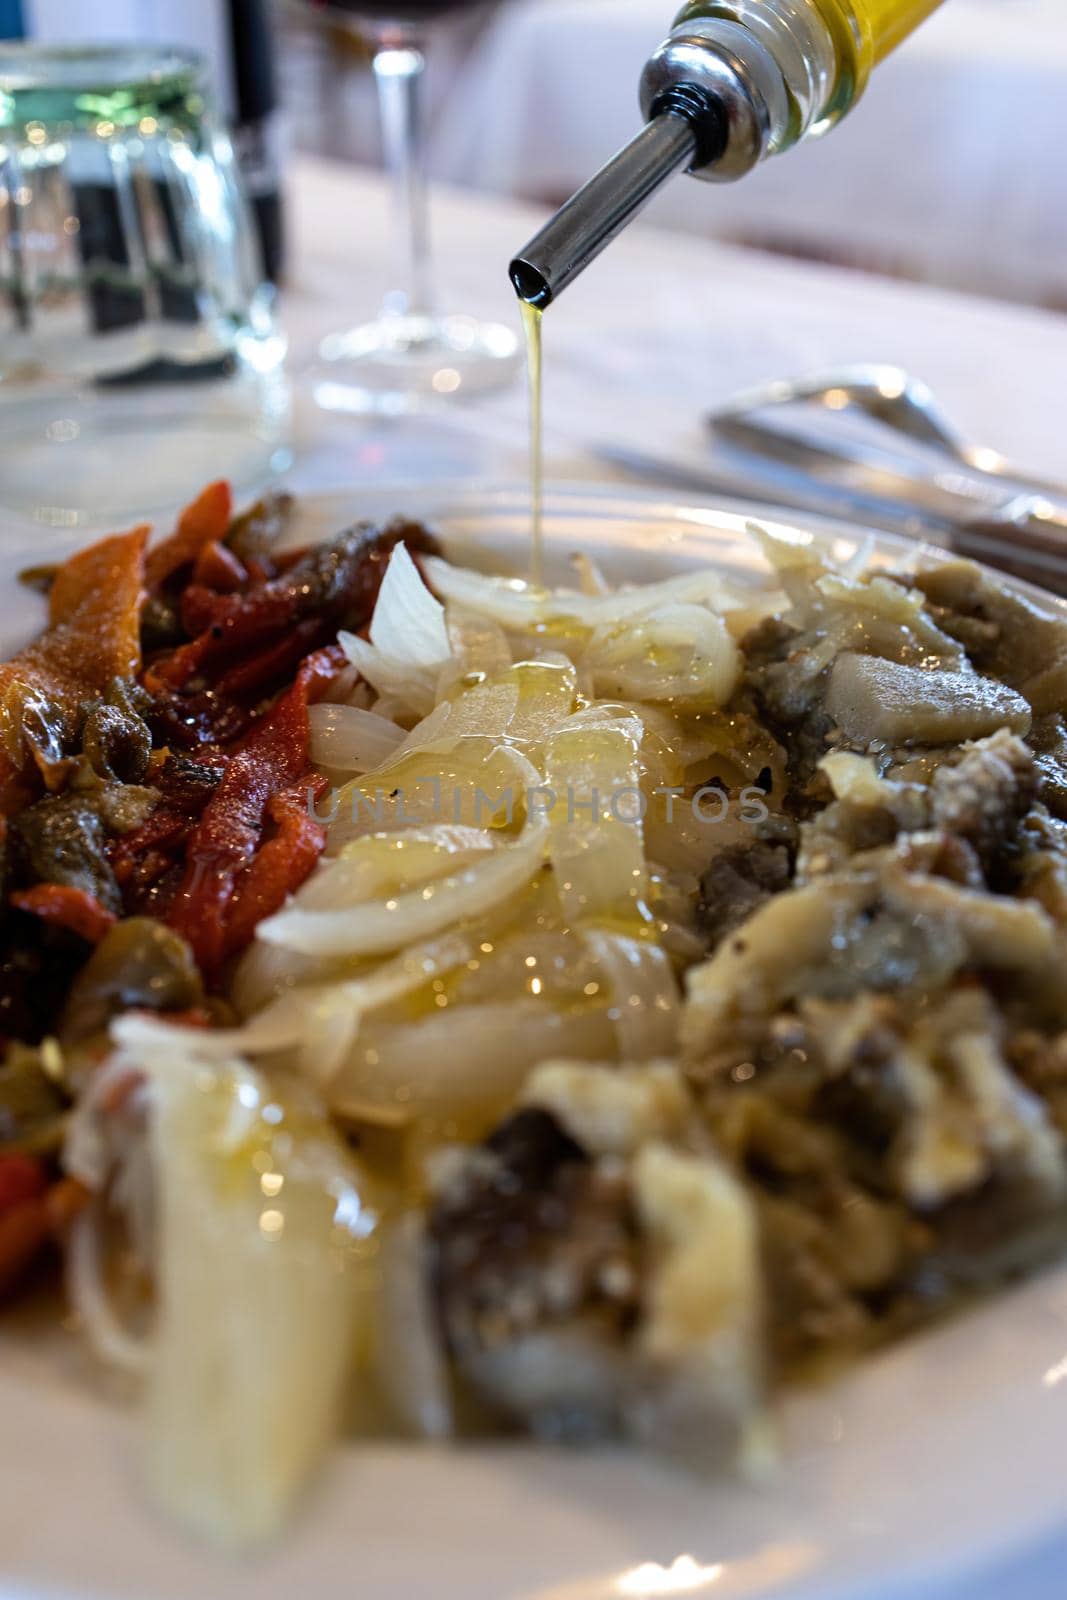 Healthy typical Catalan food in the restaurant, roasted vegetables, its name is escalivada